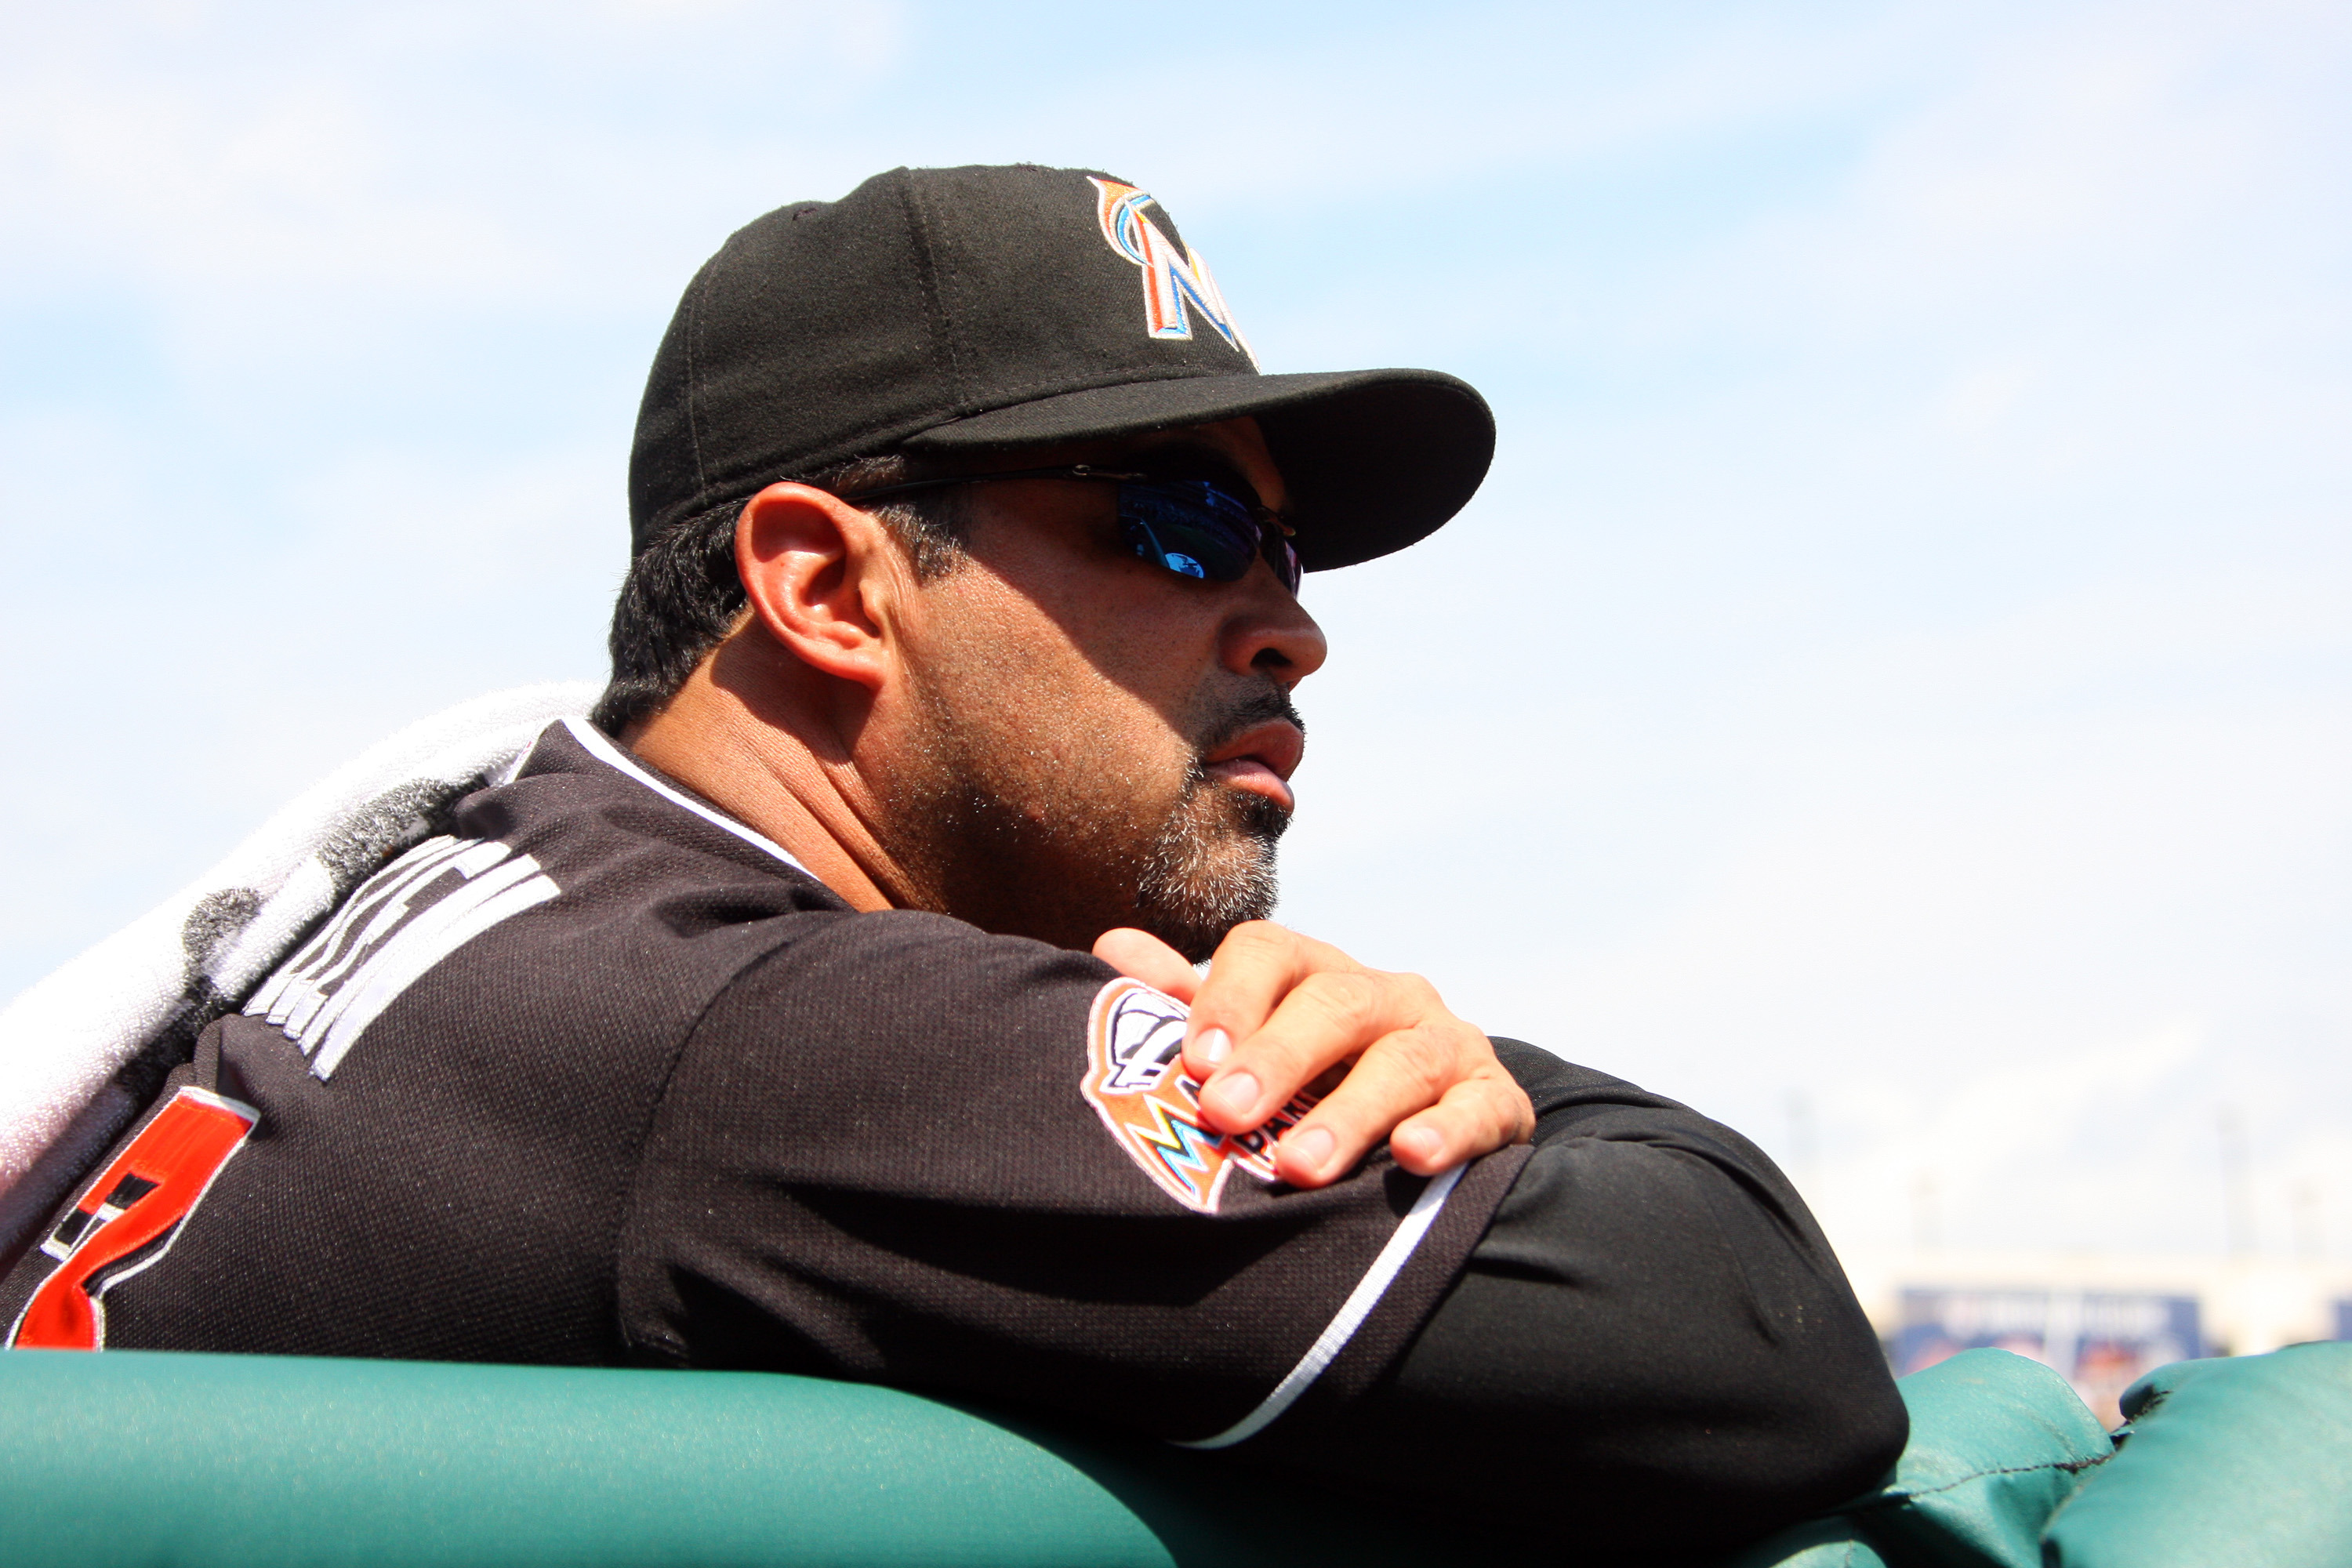 Miami Marlins new baseball stadium is a hit, now team has to play well in  order to fill the building, says manager Ozzie Guillen – New York Daily News